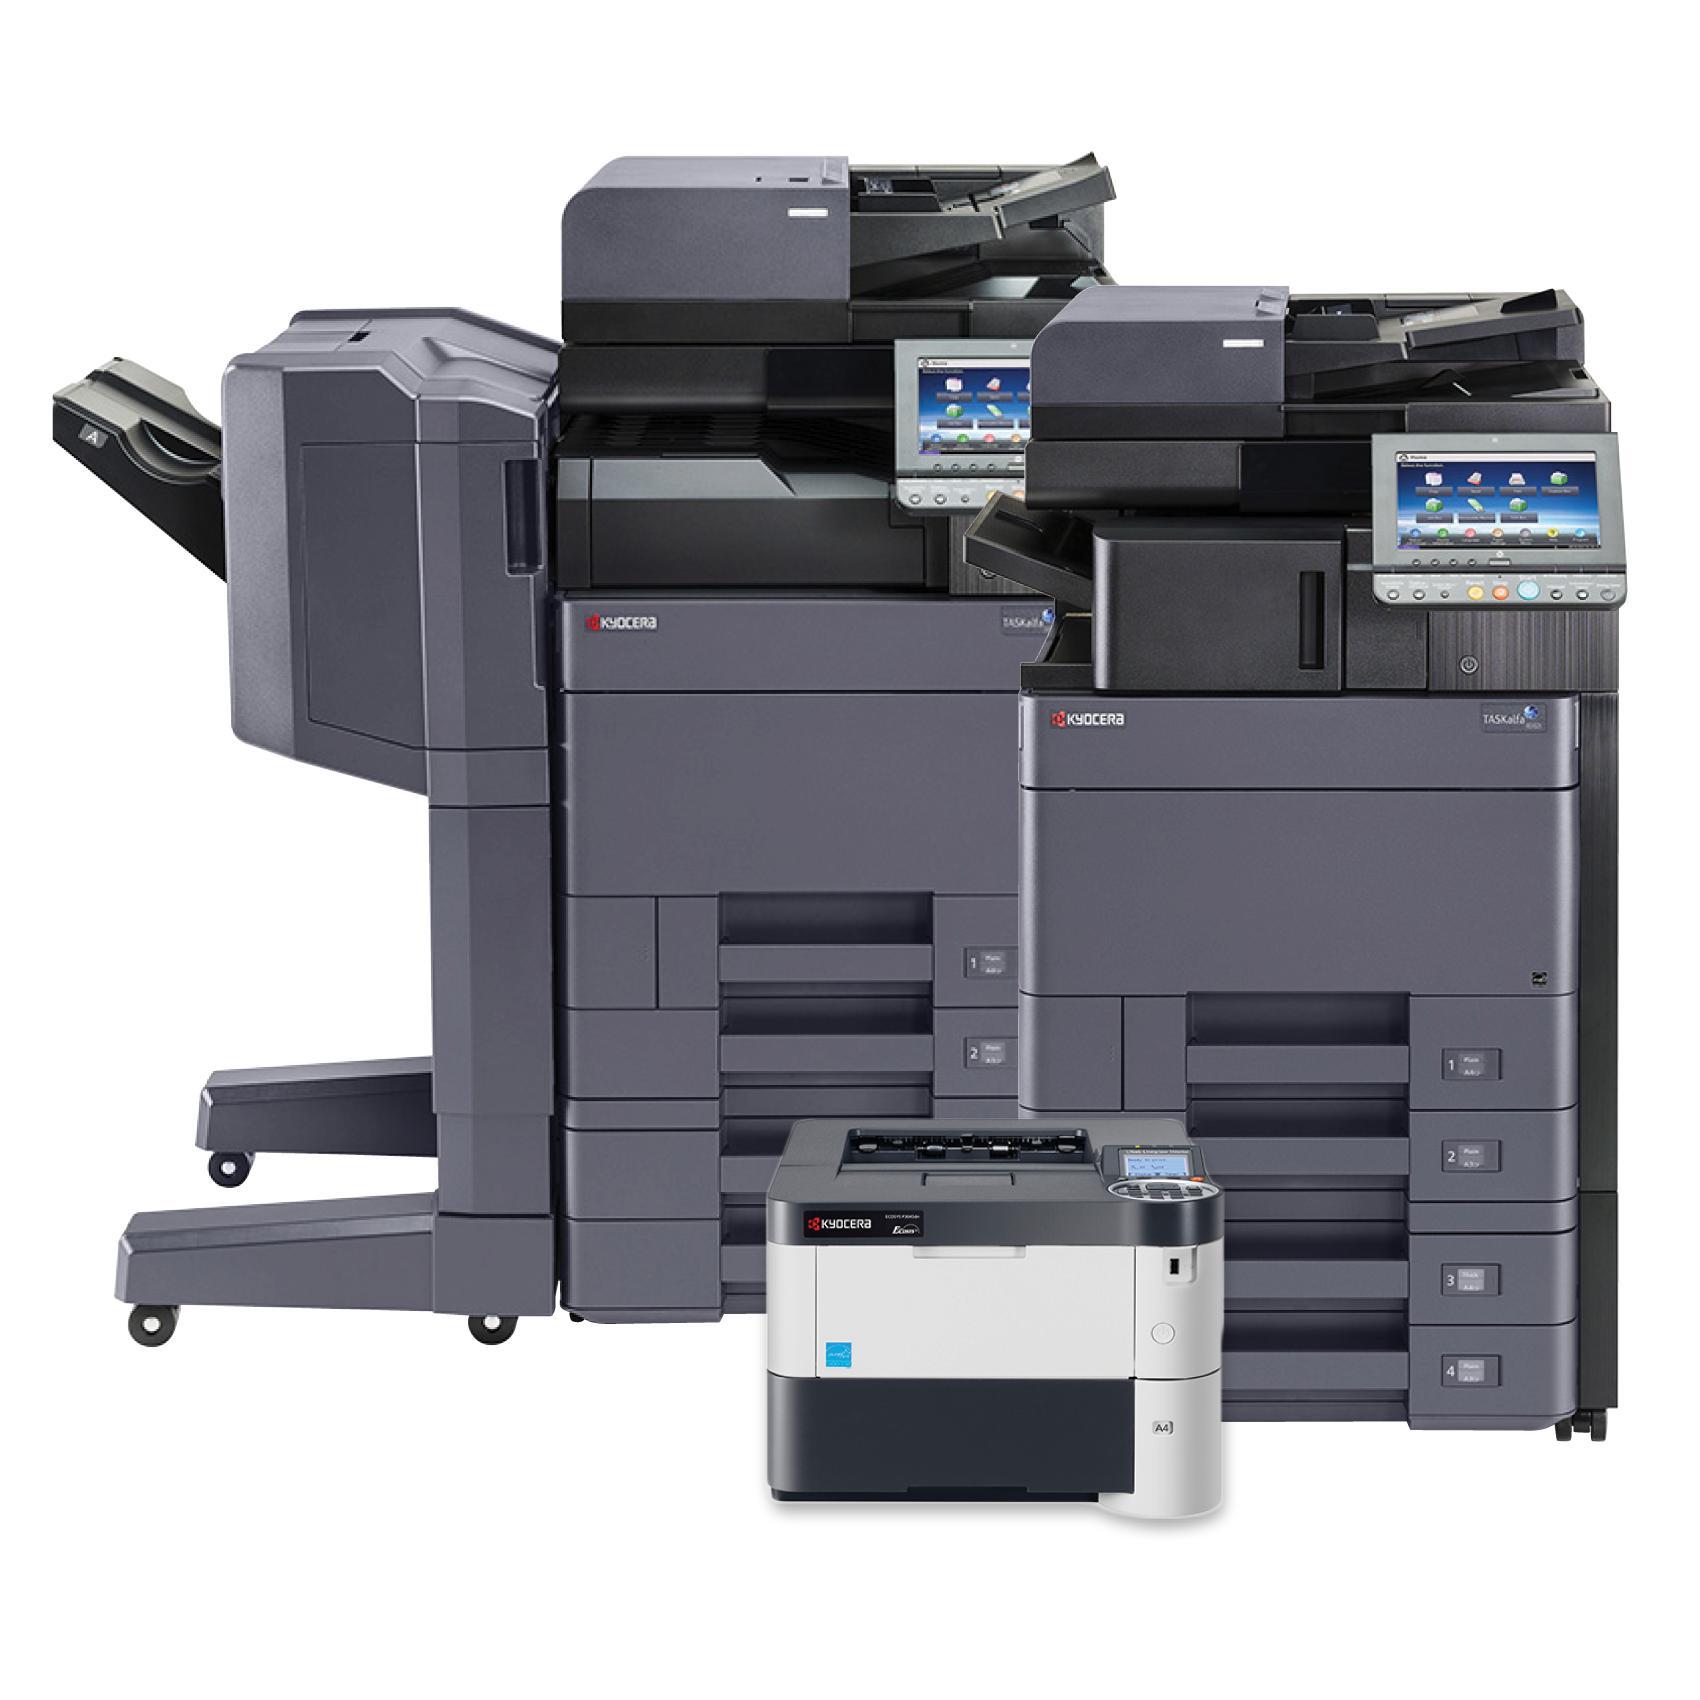 Kyocera Copier Logo - Kyocera Copiers and Printers - American Office Solutions